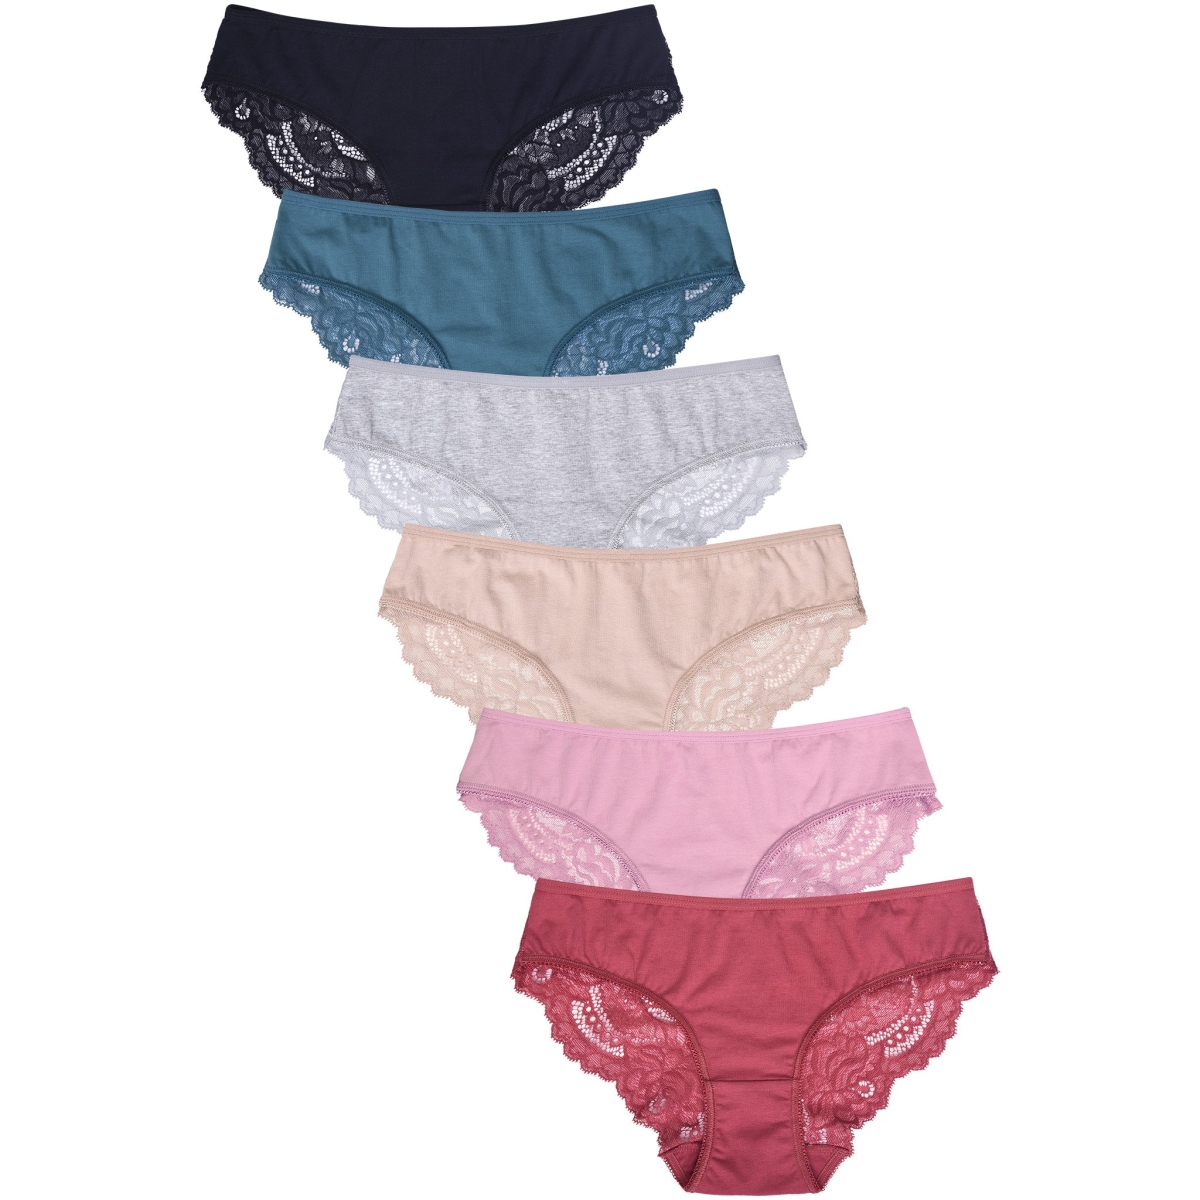 Picture of 247 Frenzy 247-LP1402CK2-SM Sofra Womens Essentials Cotton Stretch Bikini Panty Underwear - Assorted Color - Small - Pack of 6